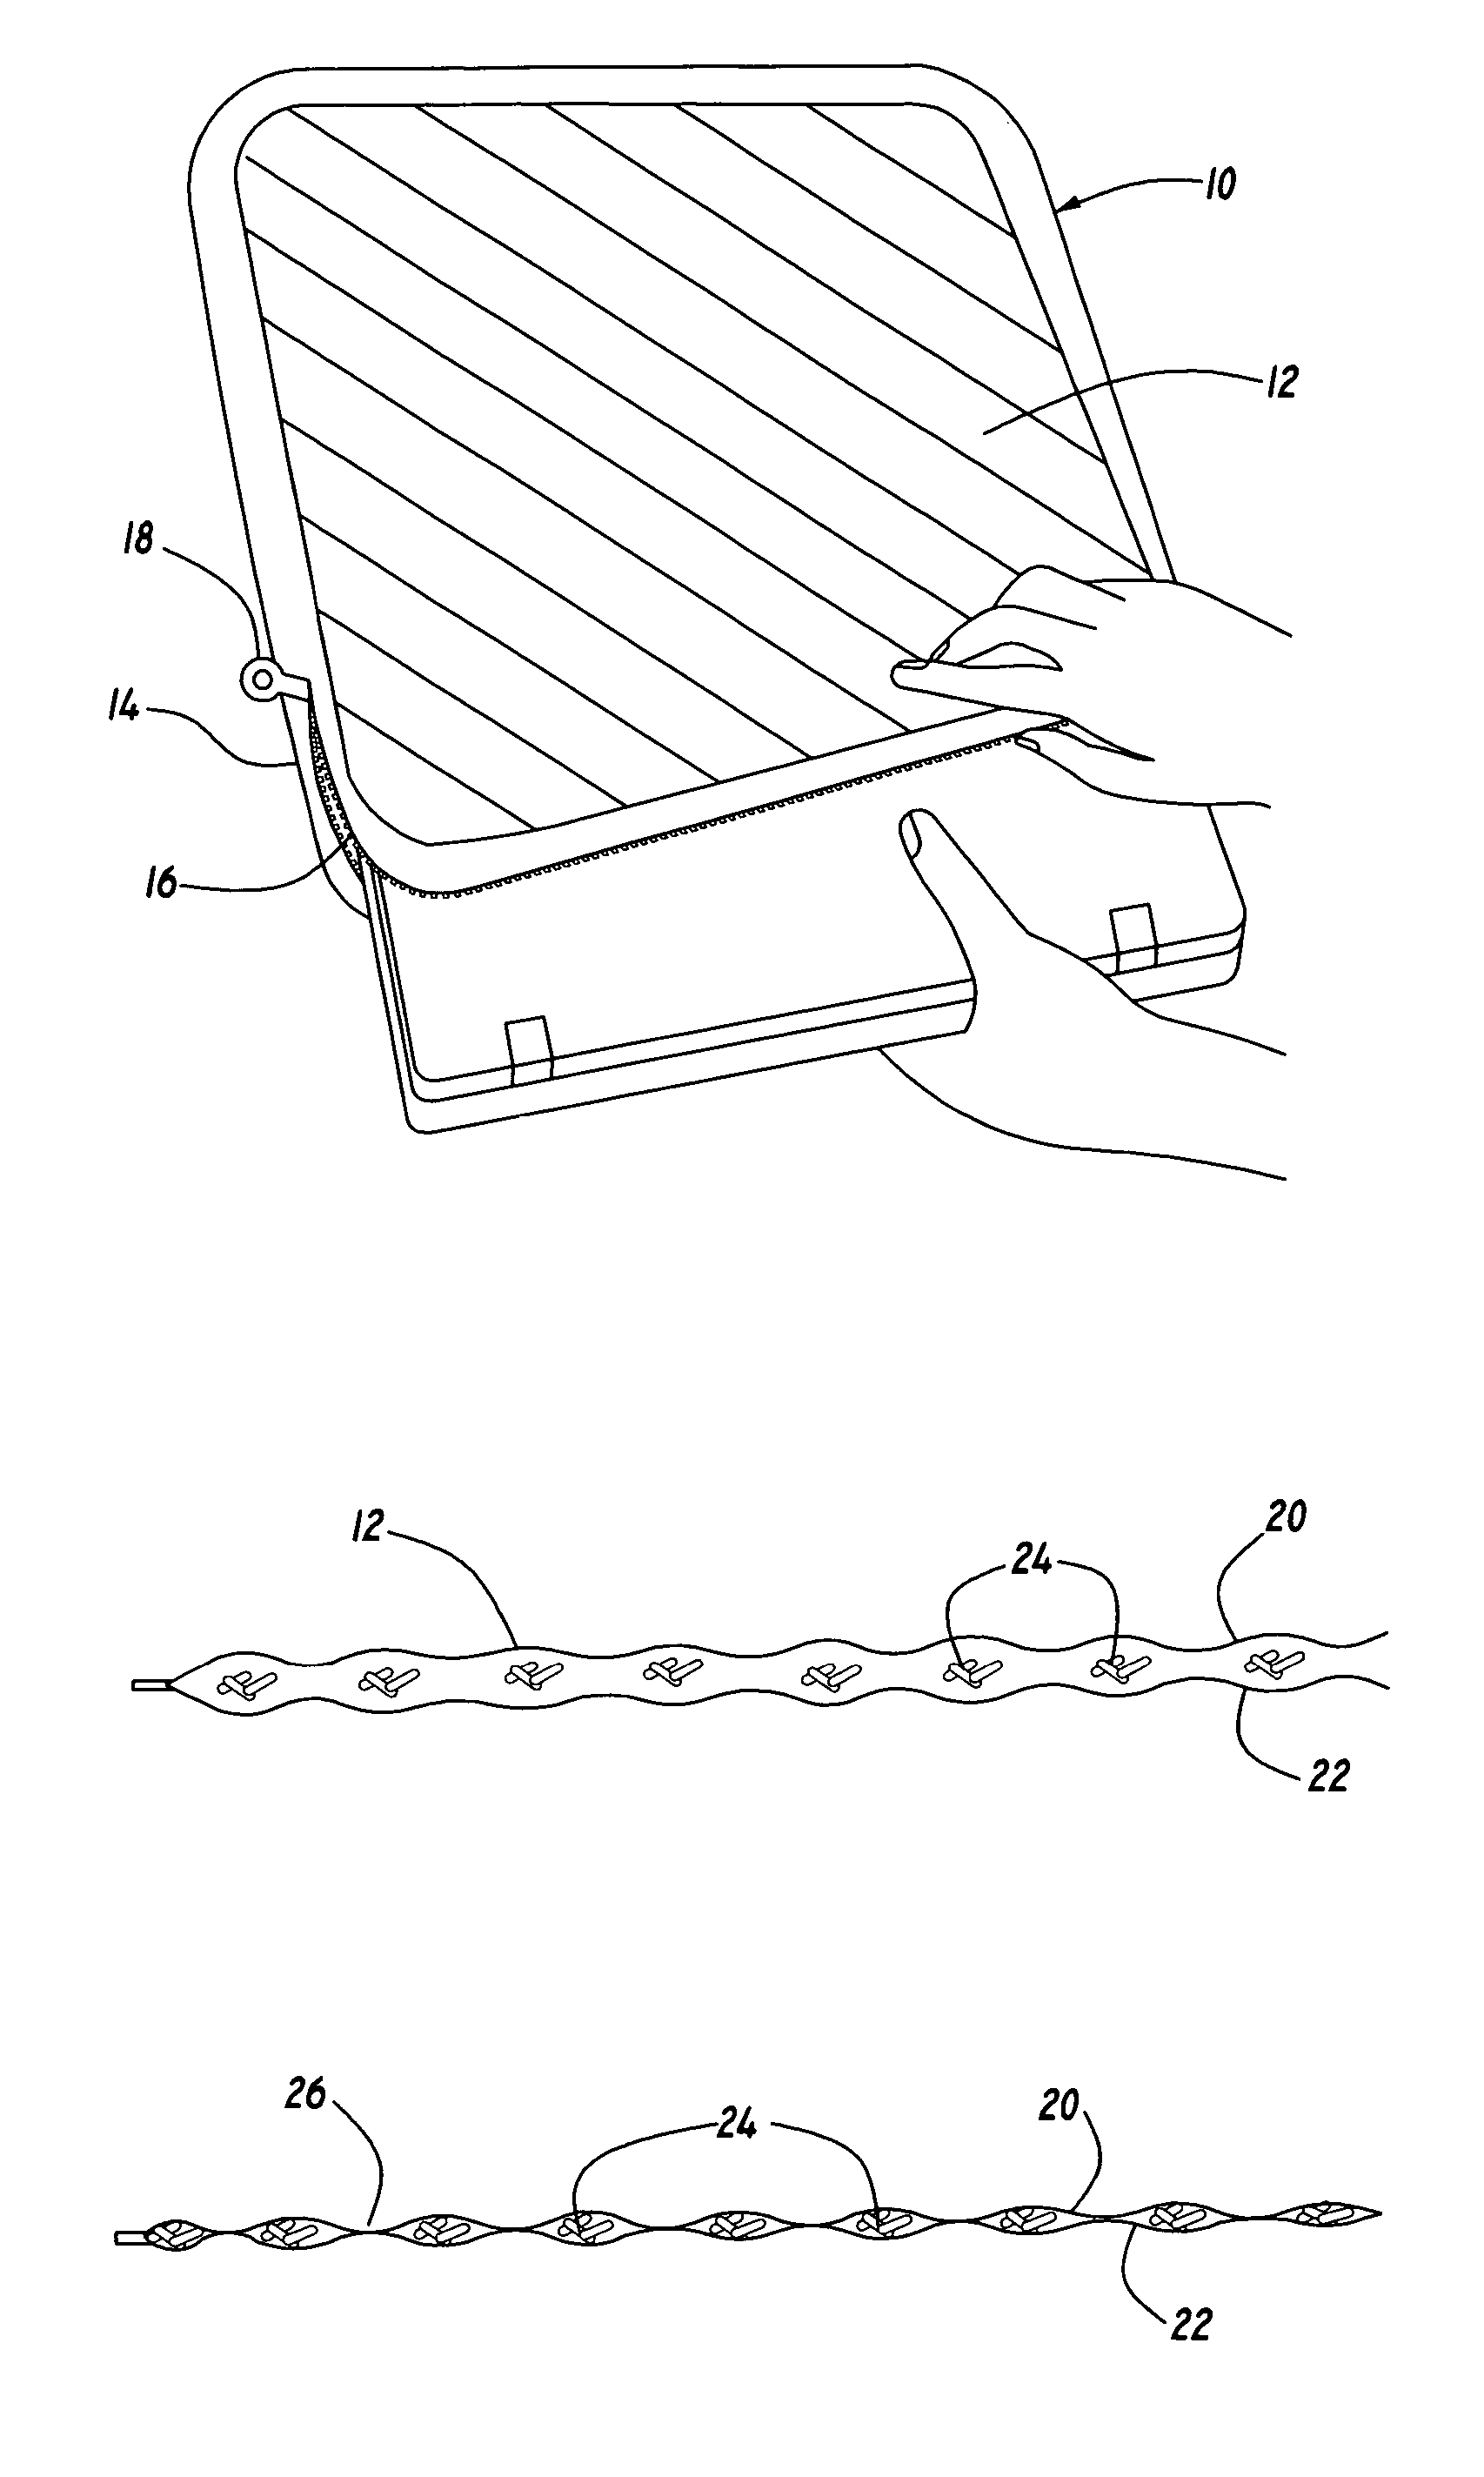 Conductive cooling pad for use with a laptop computer